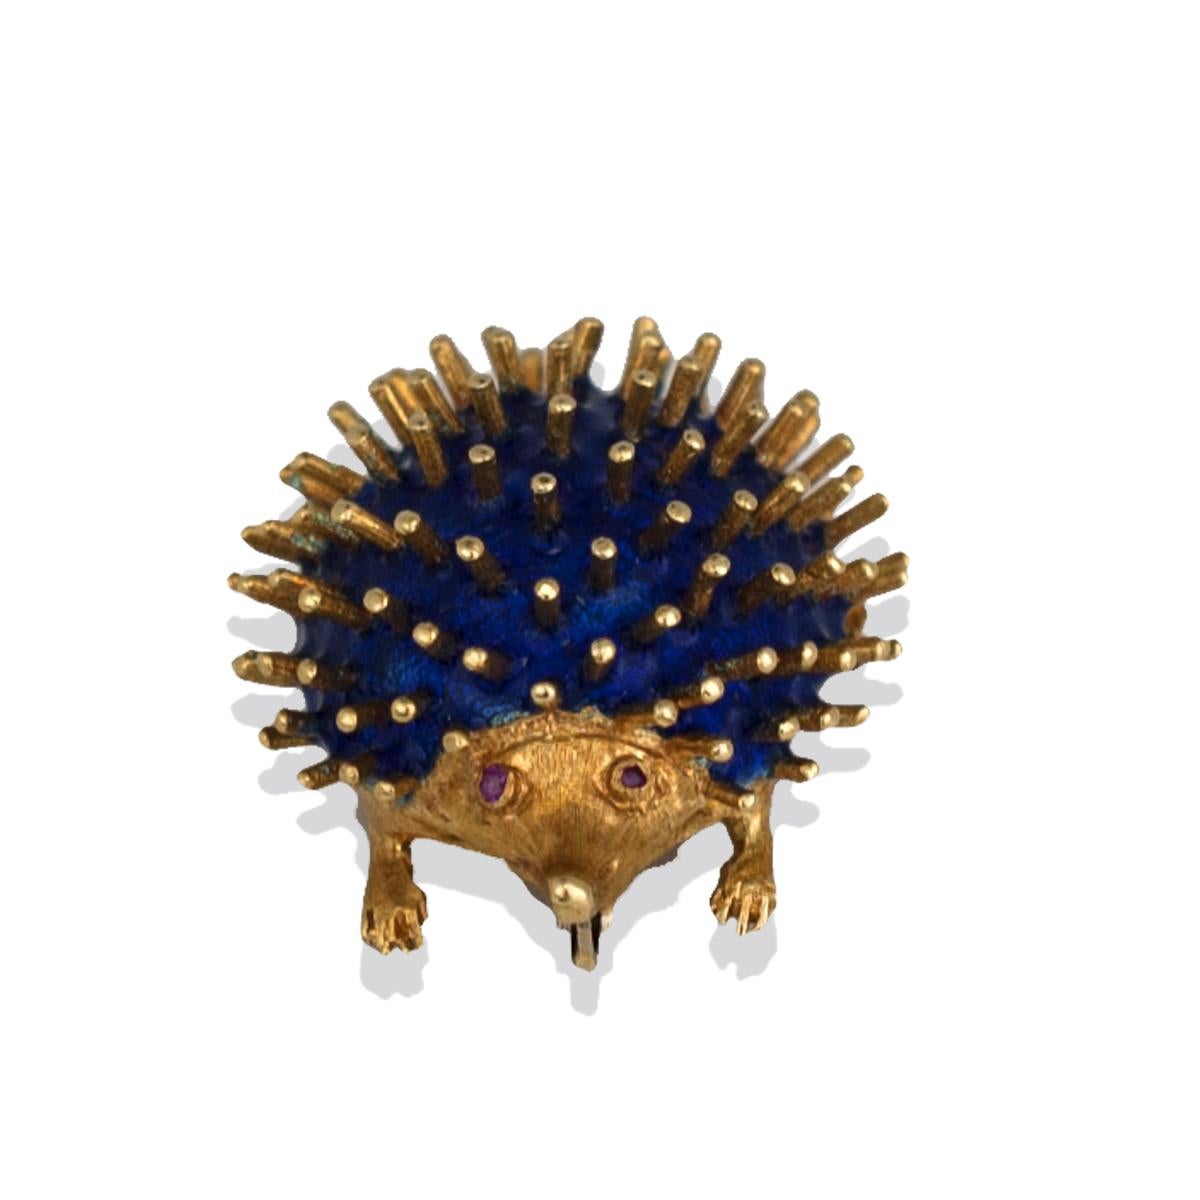 Royal Blue Enameled, Hedgehog Ruby Pin, Hallmarked, CG, 750 Gold 
Mid-Century Pin features 1-1/2 inch in length by 1 inch wide, pin of quality workmanship Hallmarked CG, 750 
Detailed eyes of bezel set rubies, feet with detail and white gold locking